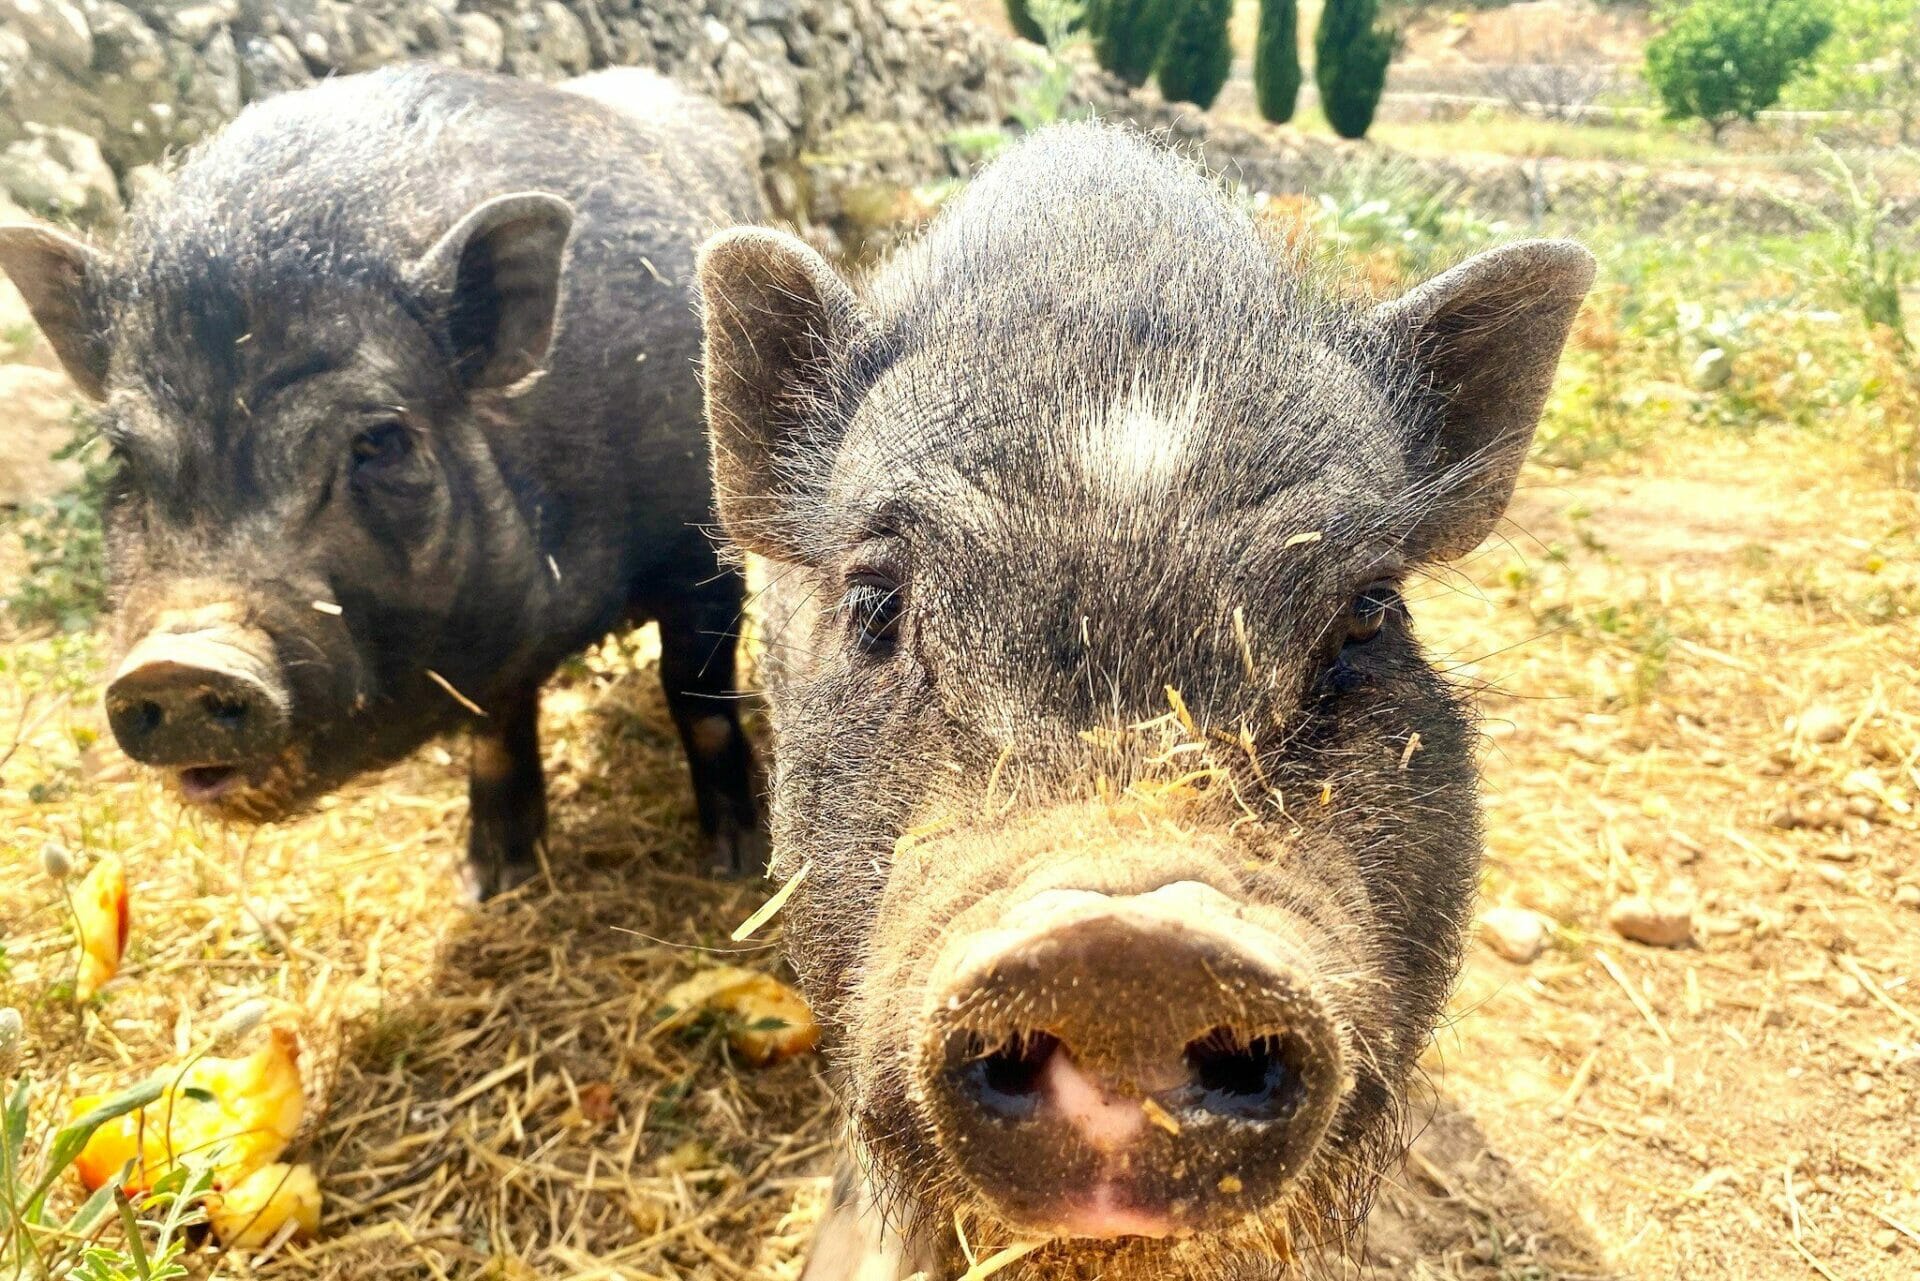 May Newsletter - New Piglets and Bunnies